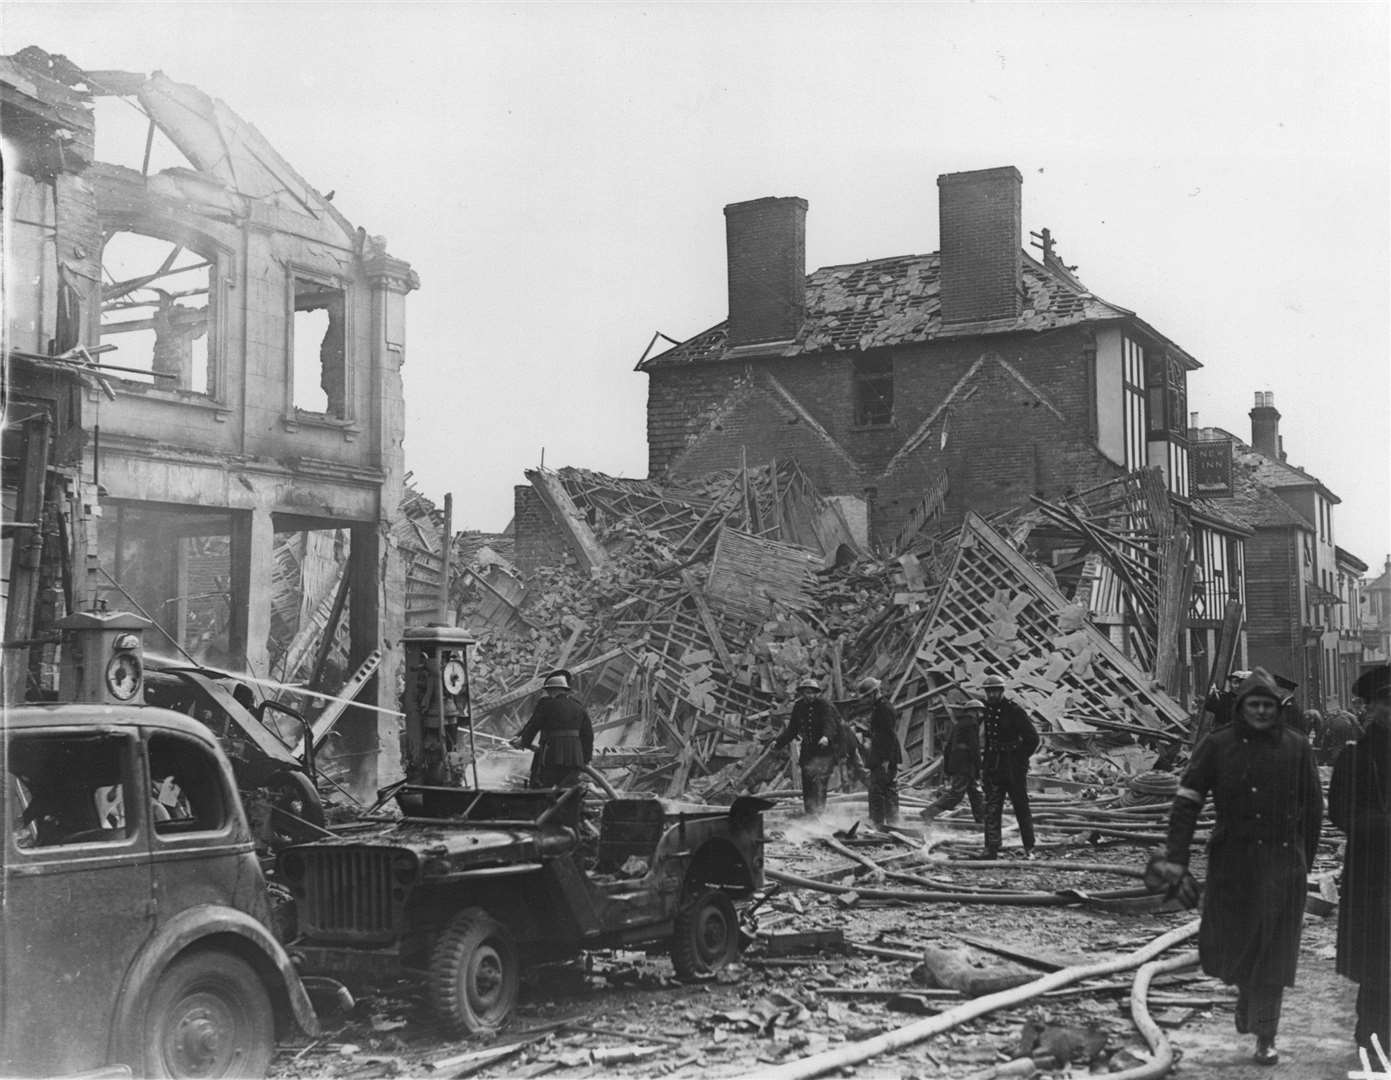 Mr Swan's family was lucky to avoid the 1943 bombing. Picture: Steve Salter archive